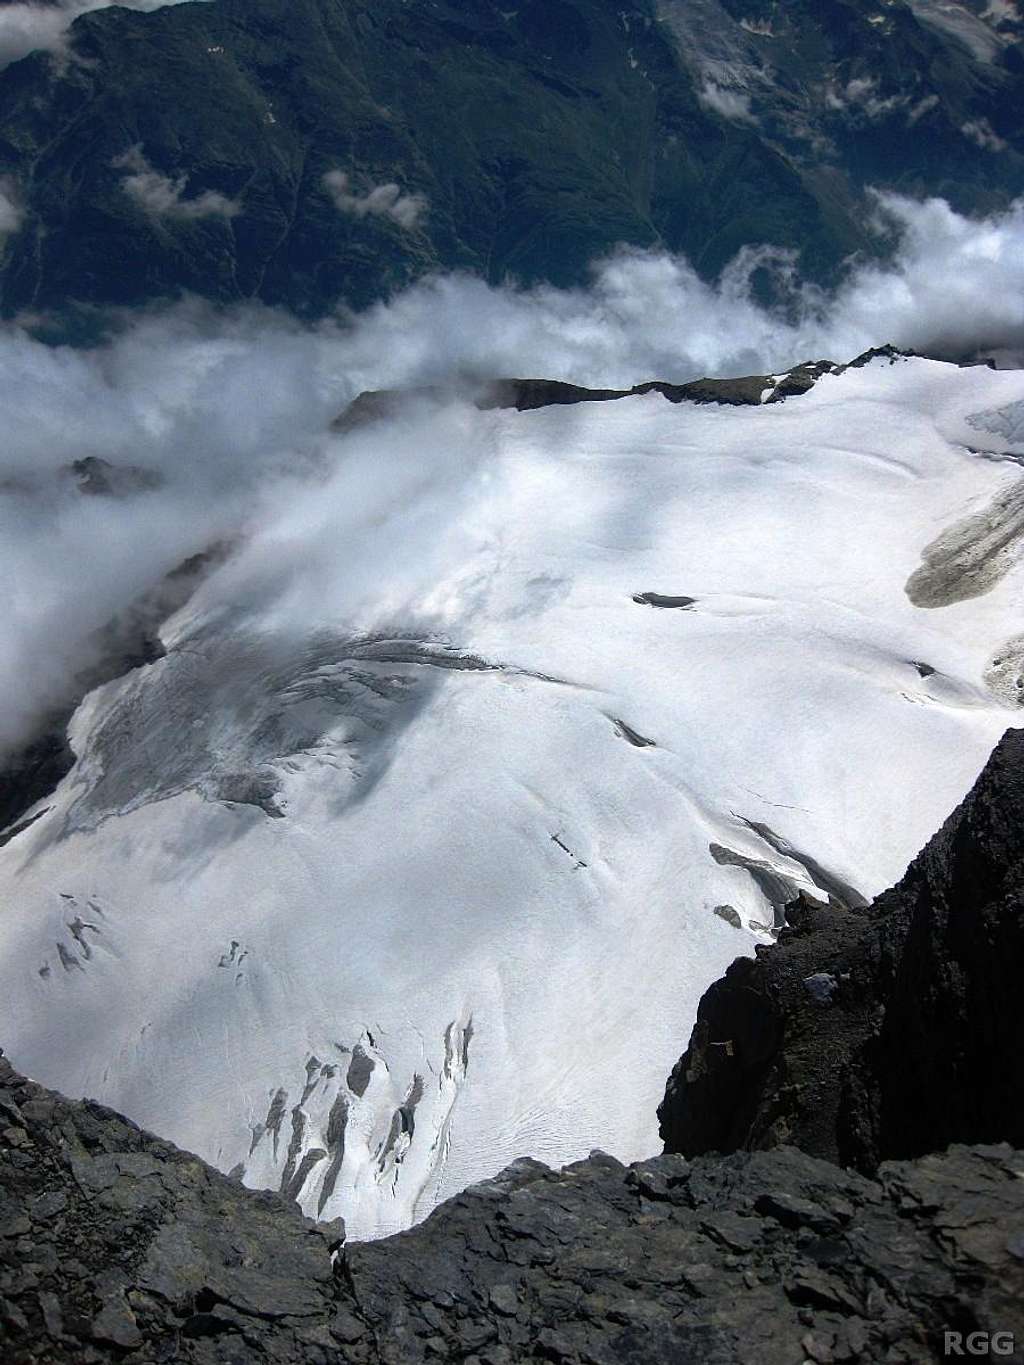 Looking down on the Undere Stelligletscher from the summit of Üssers Barrhorn